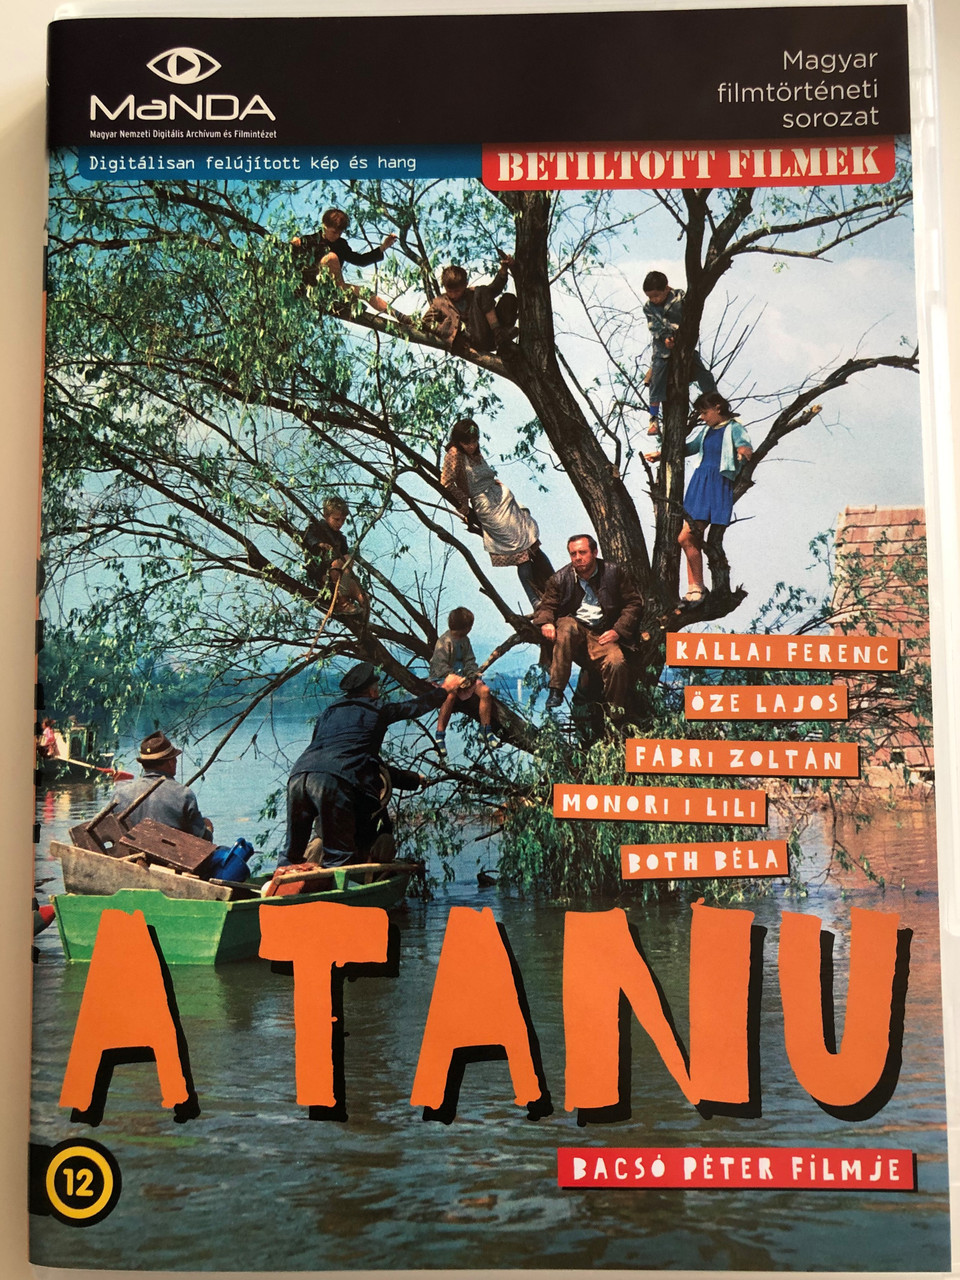 A Tanu Dvd 1969 The Witness Directed By Bacso Peter Starring Kallai Ferenc Monori Lili Oze Lajos Both Bela Hungarian Classic Hungarian Movie Magyar Film A K A Without A Trace Bibleinmylanguage